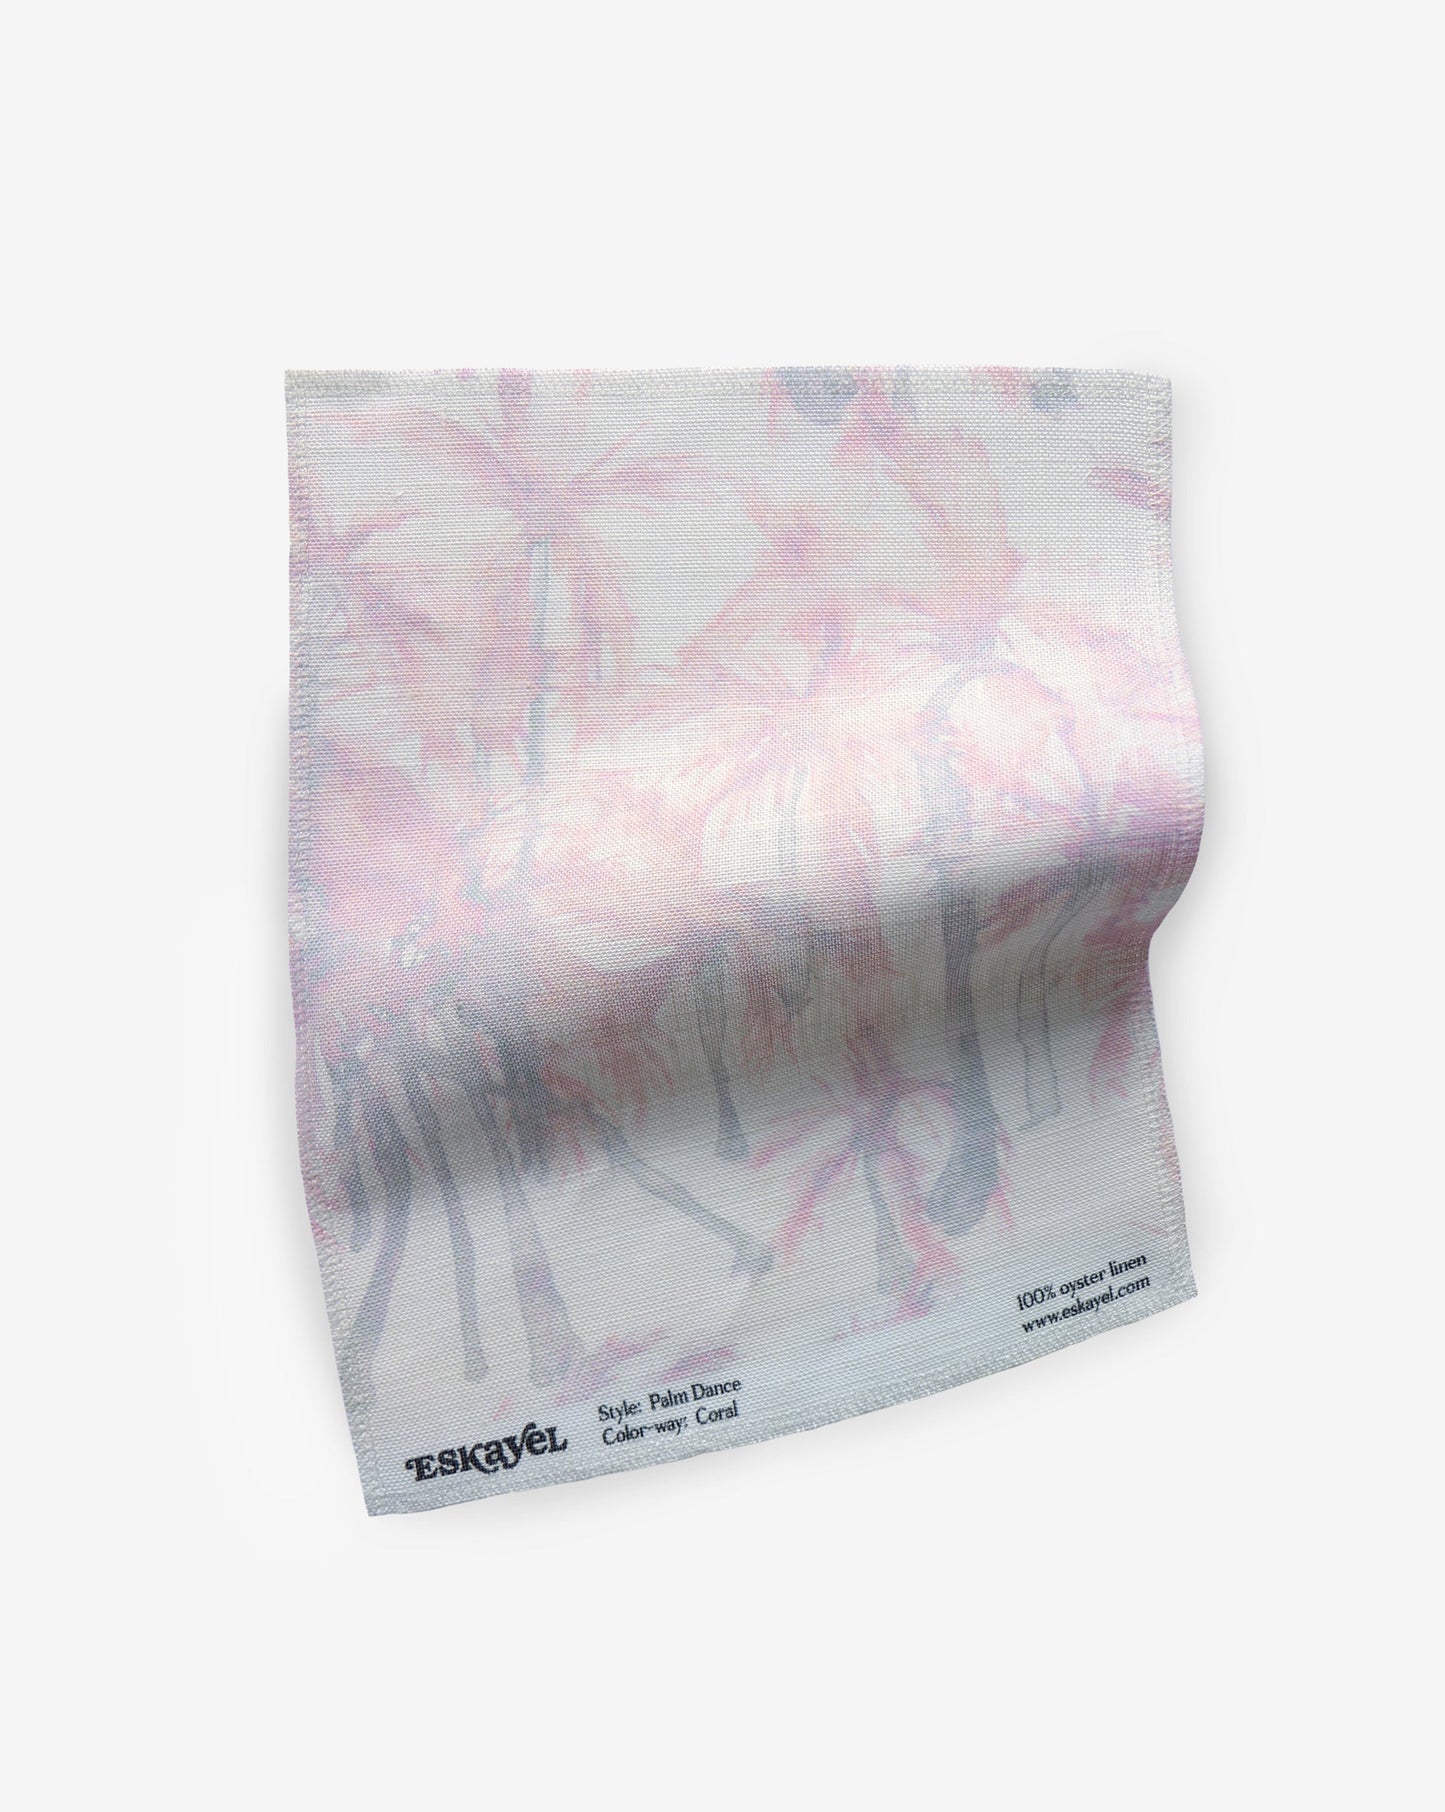 A pink and white Palm Dance Fabric Coral fabric with a palm tree watercolor pattern